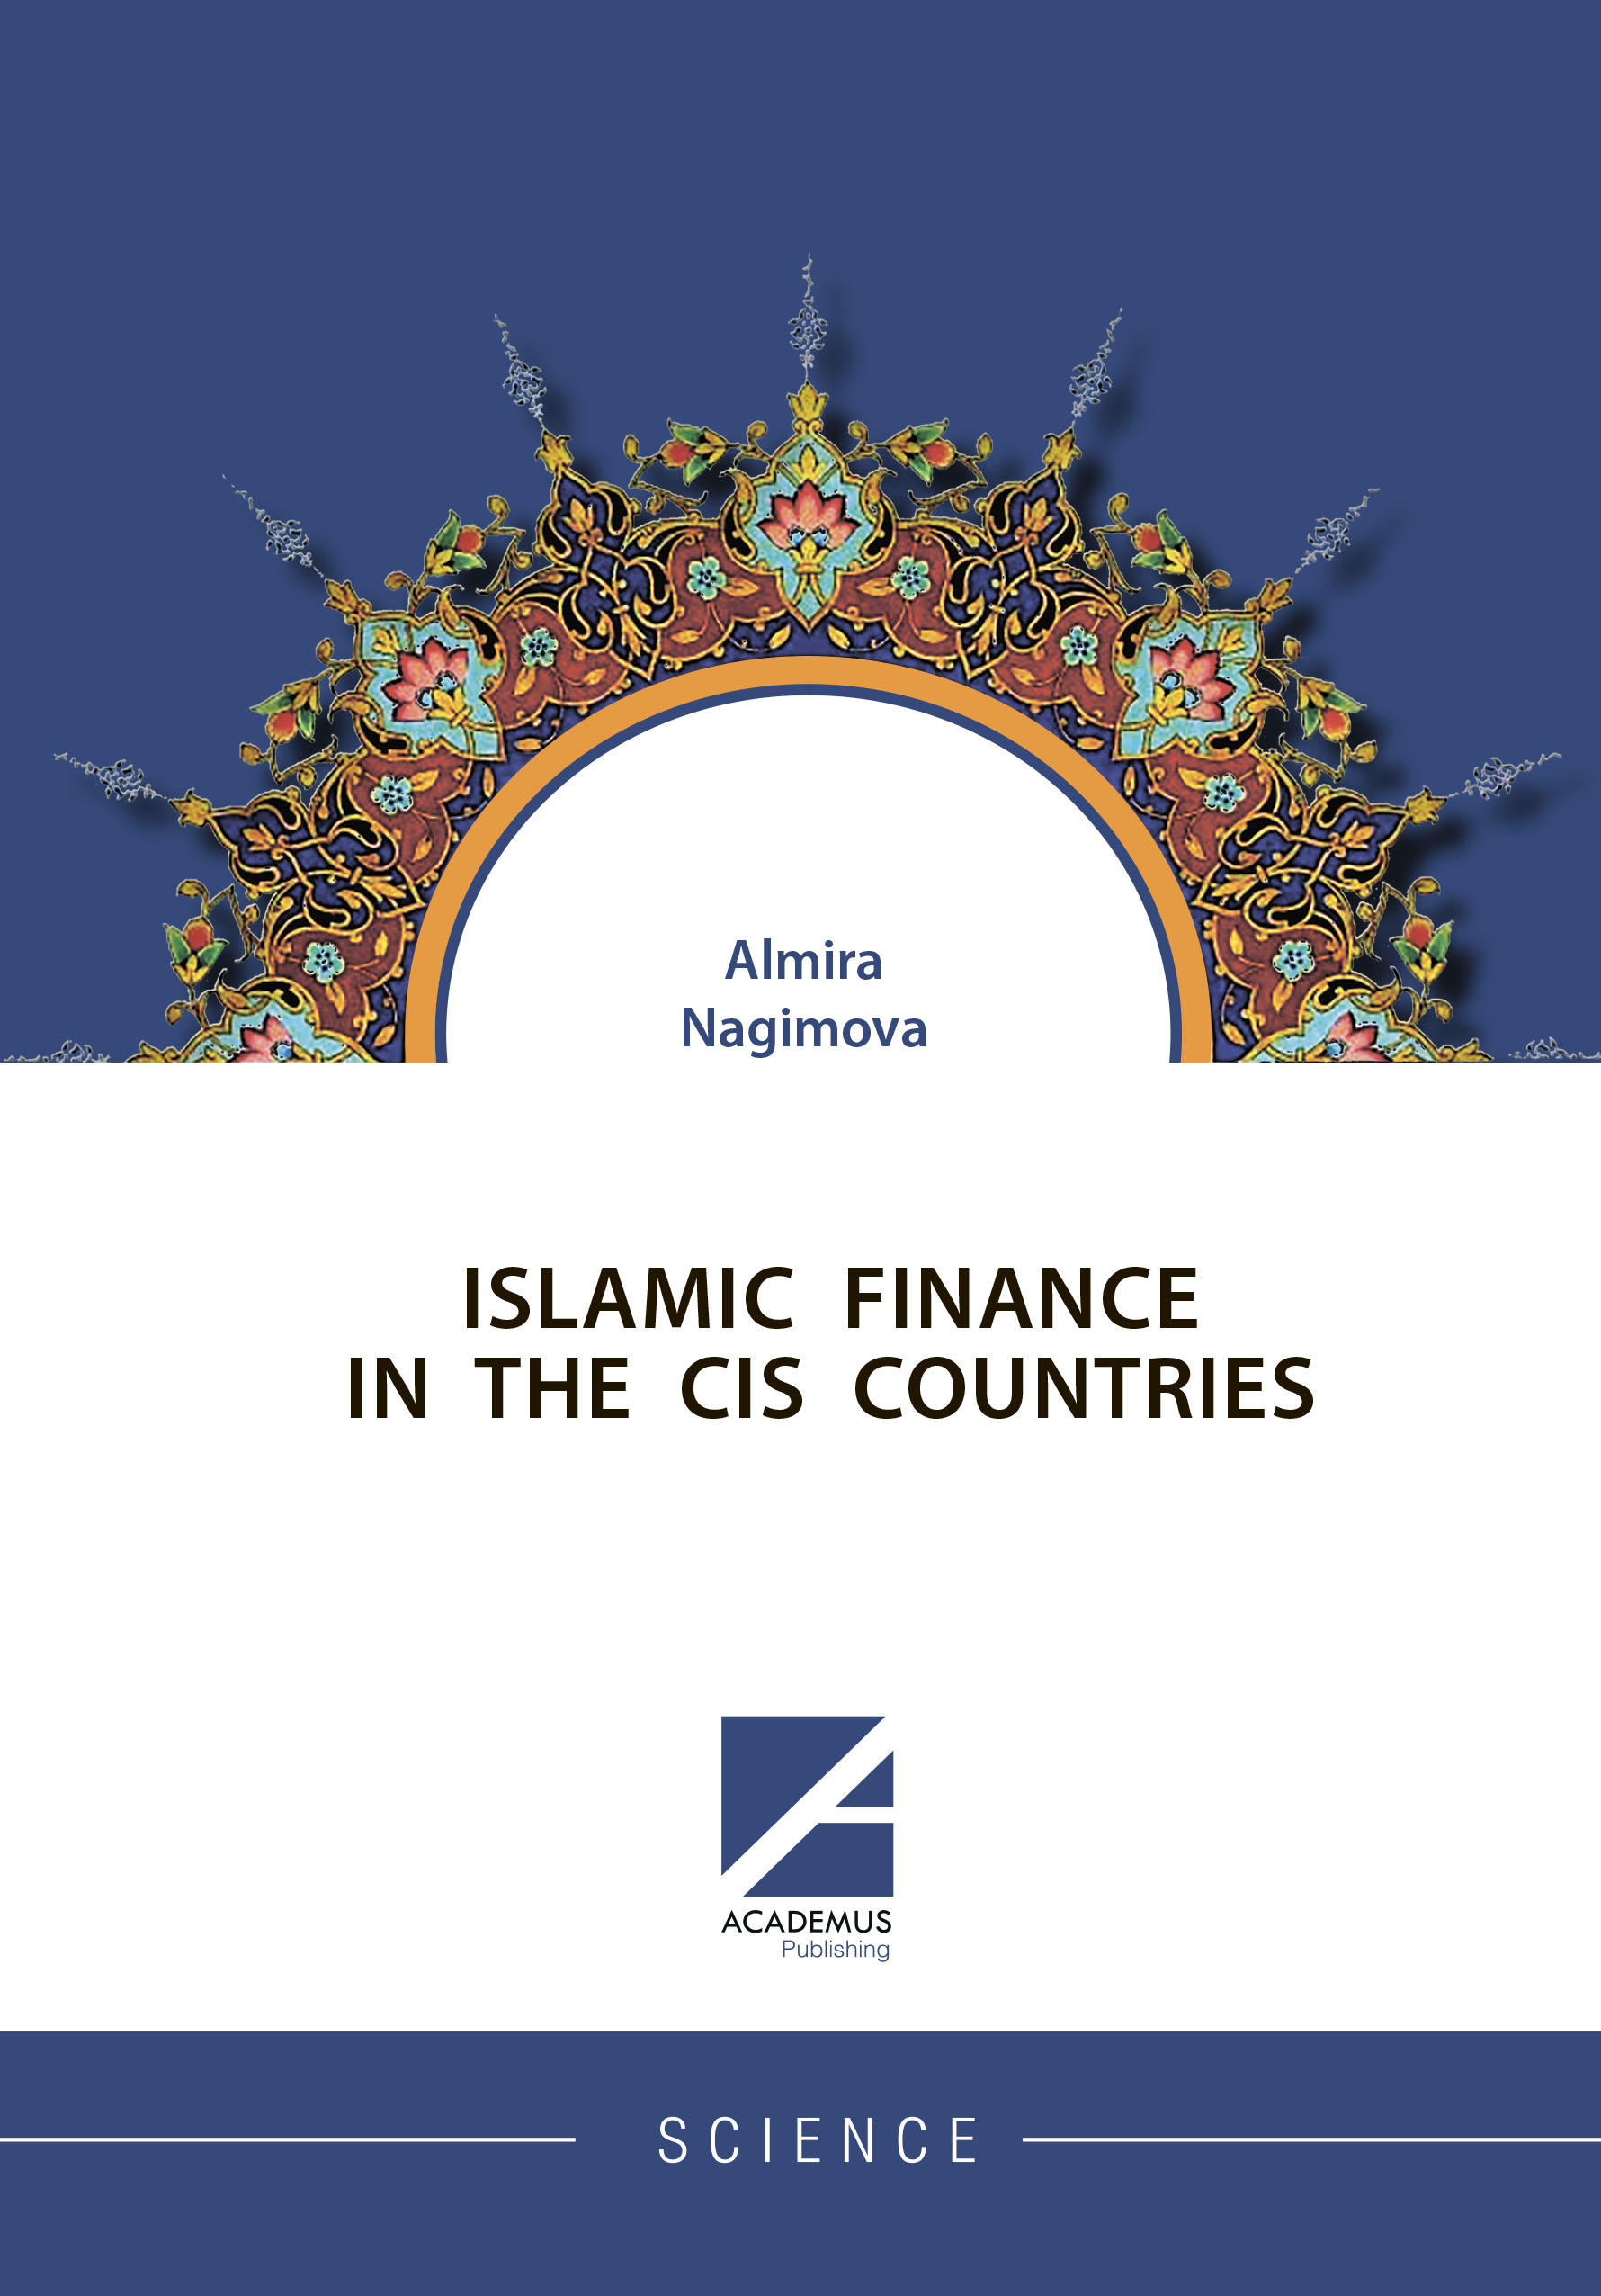                         ISLAMIC FINANCE IN THE CIS COUNTRIES
            